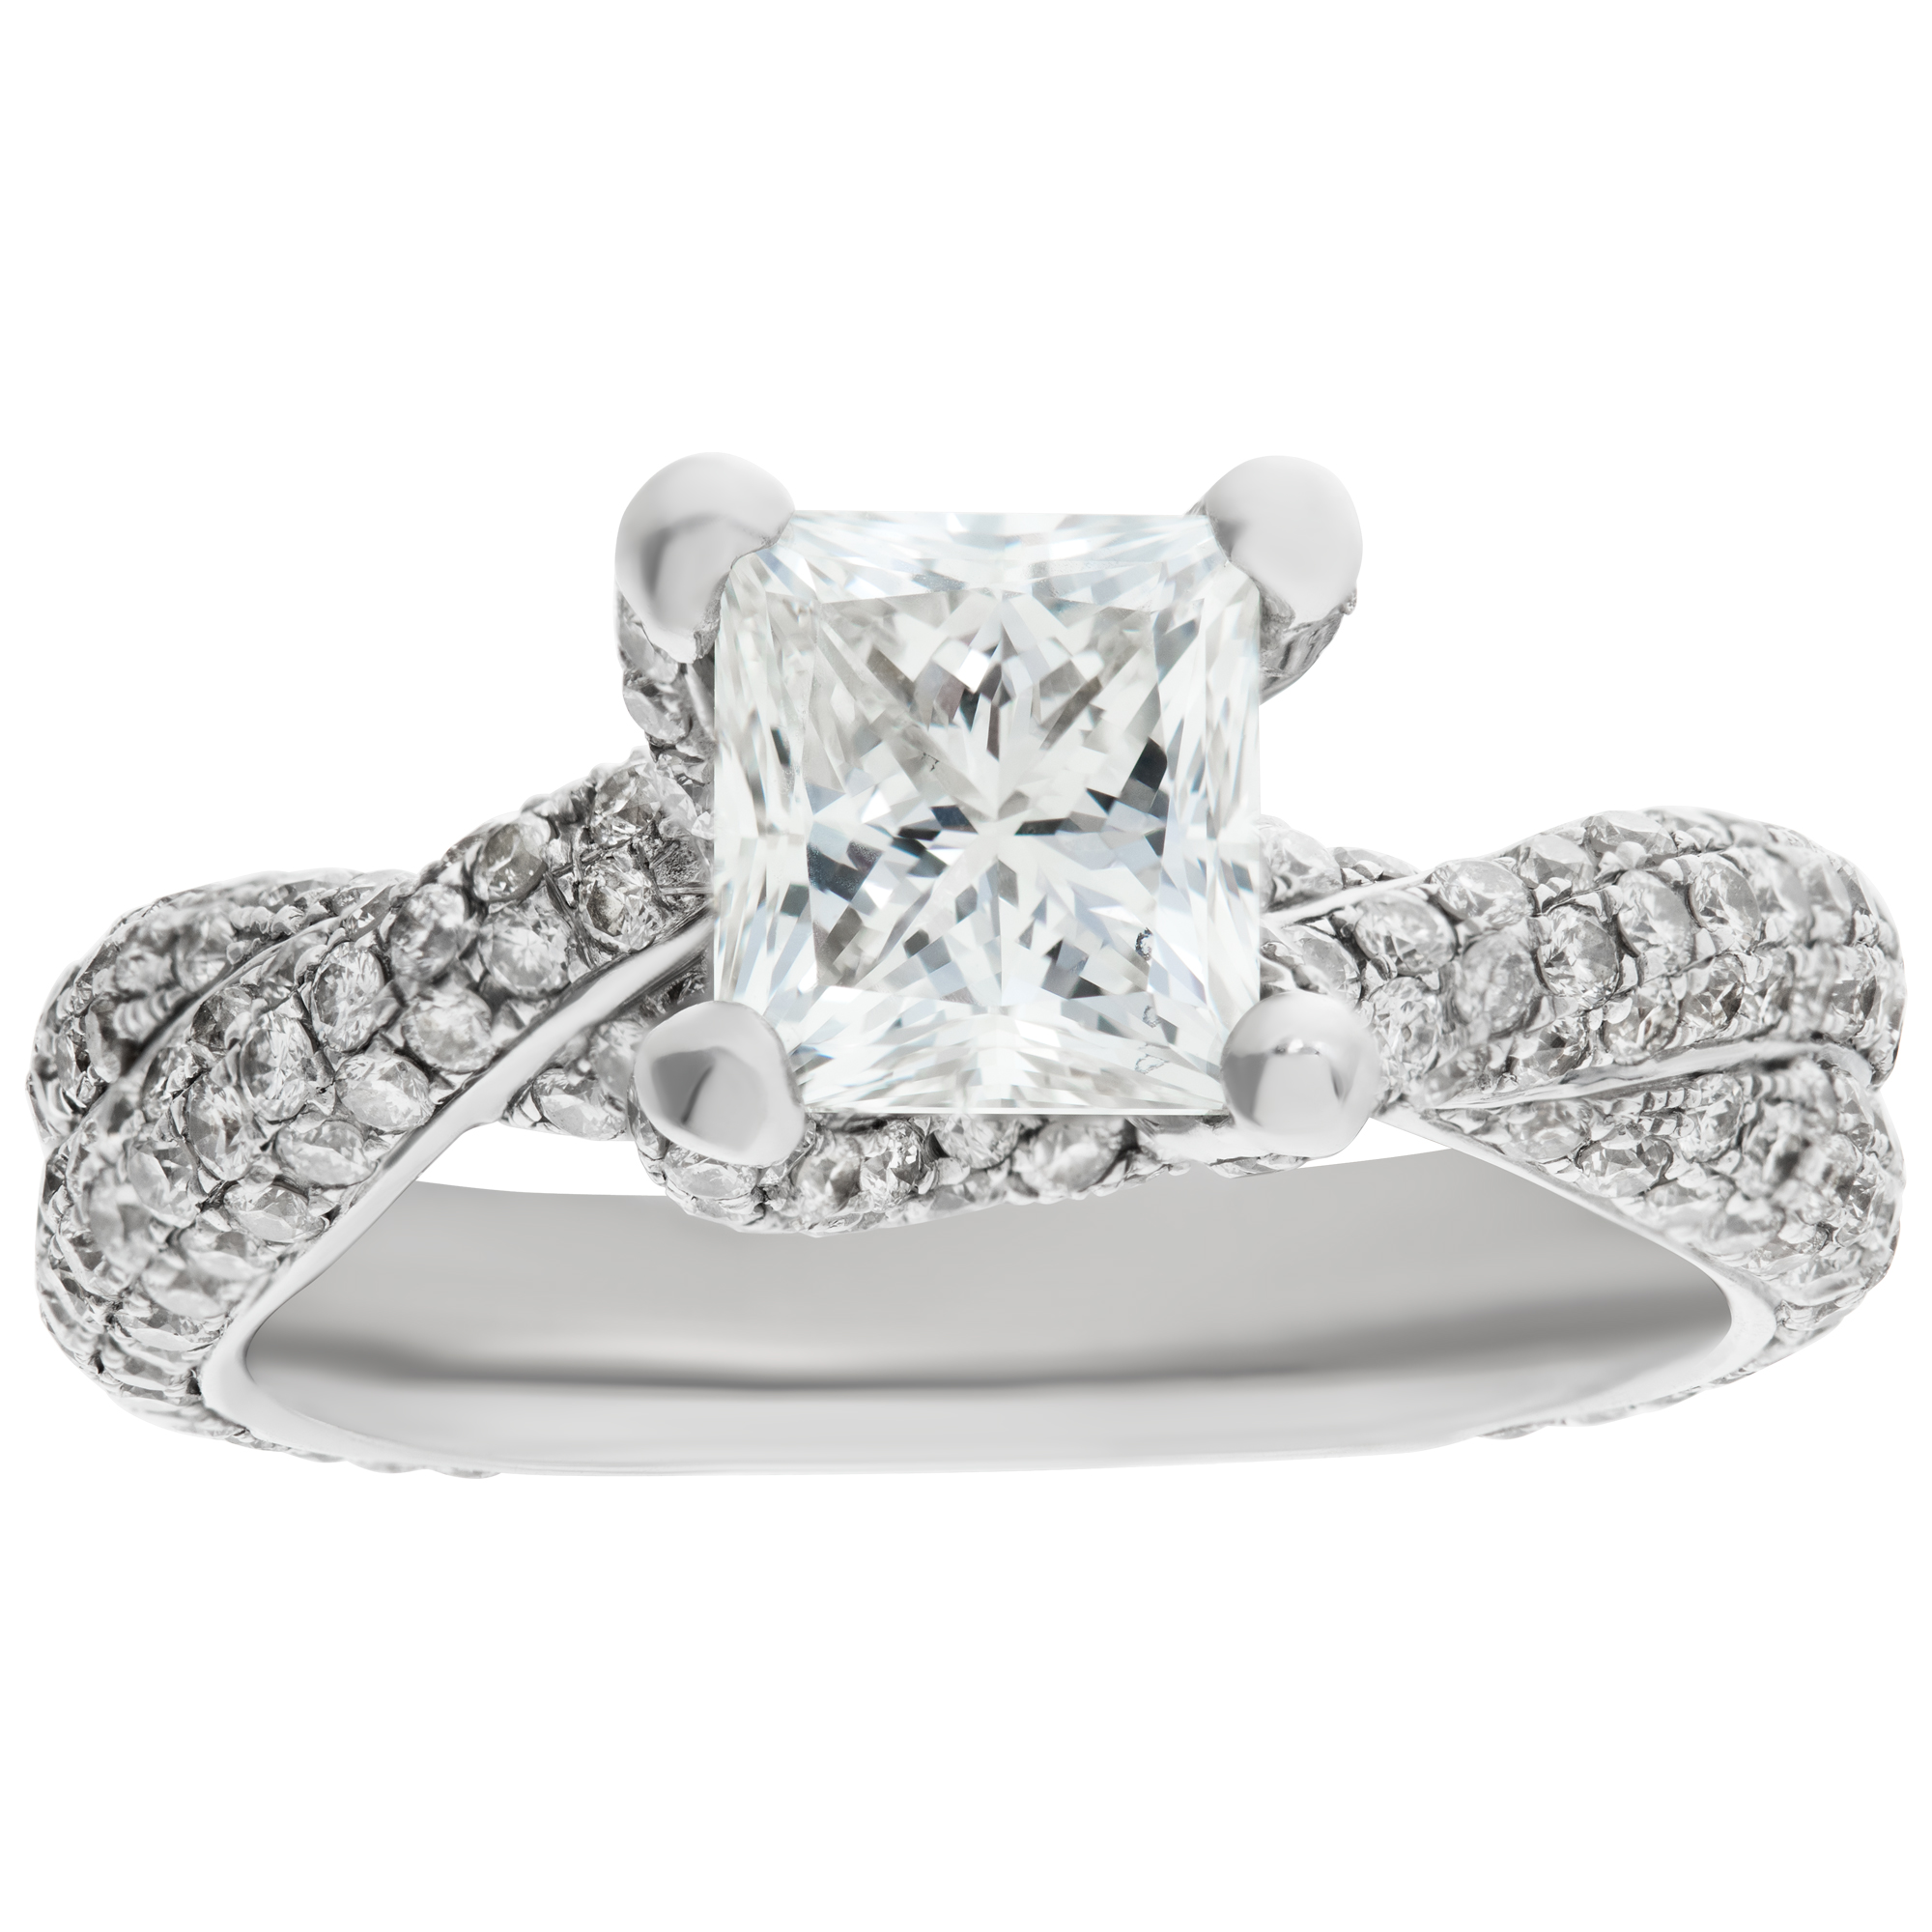 GIA certified rectangular diamond ring 1.53 cts (I Color, VS2 Clarity) set in micro pave diamond 18k white gold.